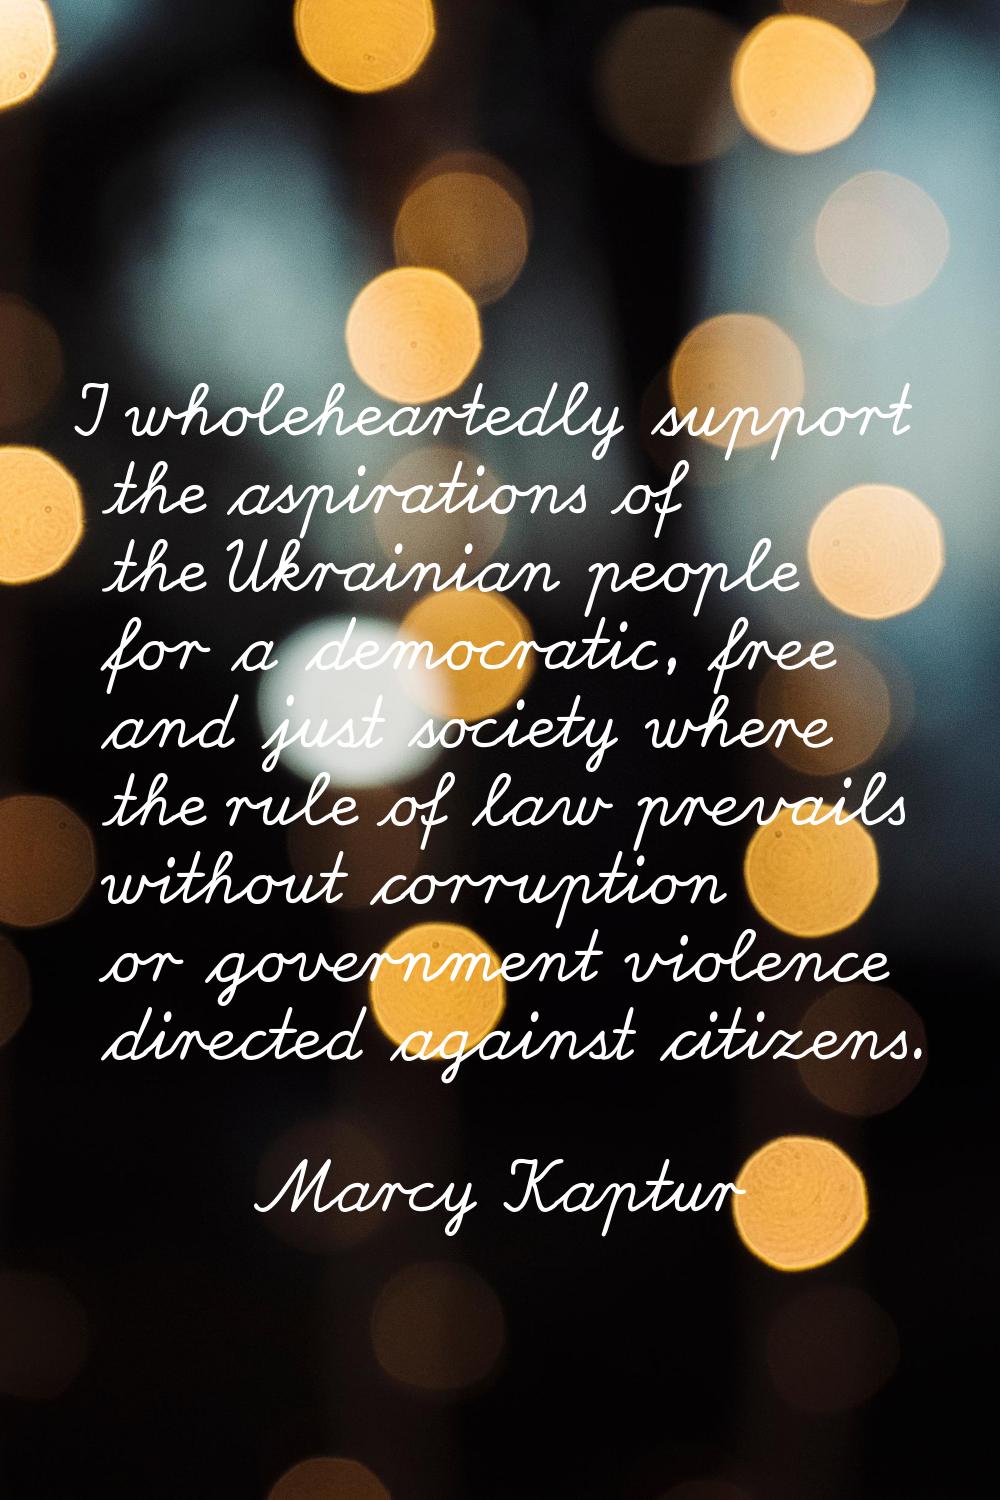 I wholeheartedly support the aspirations of the Ukrainian people for a democratic, free and just so